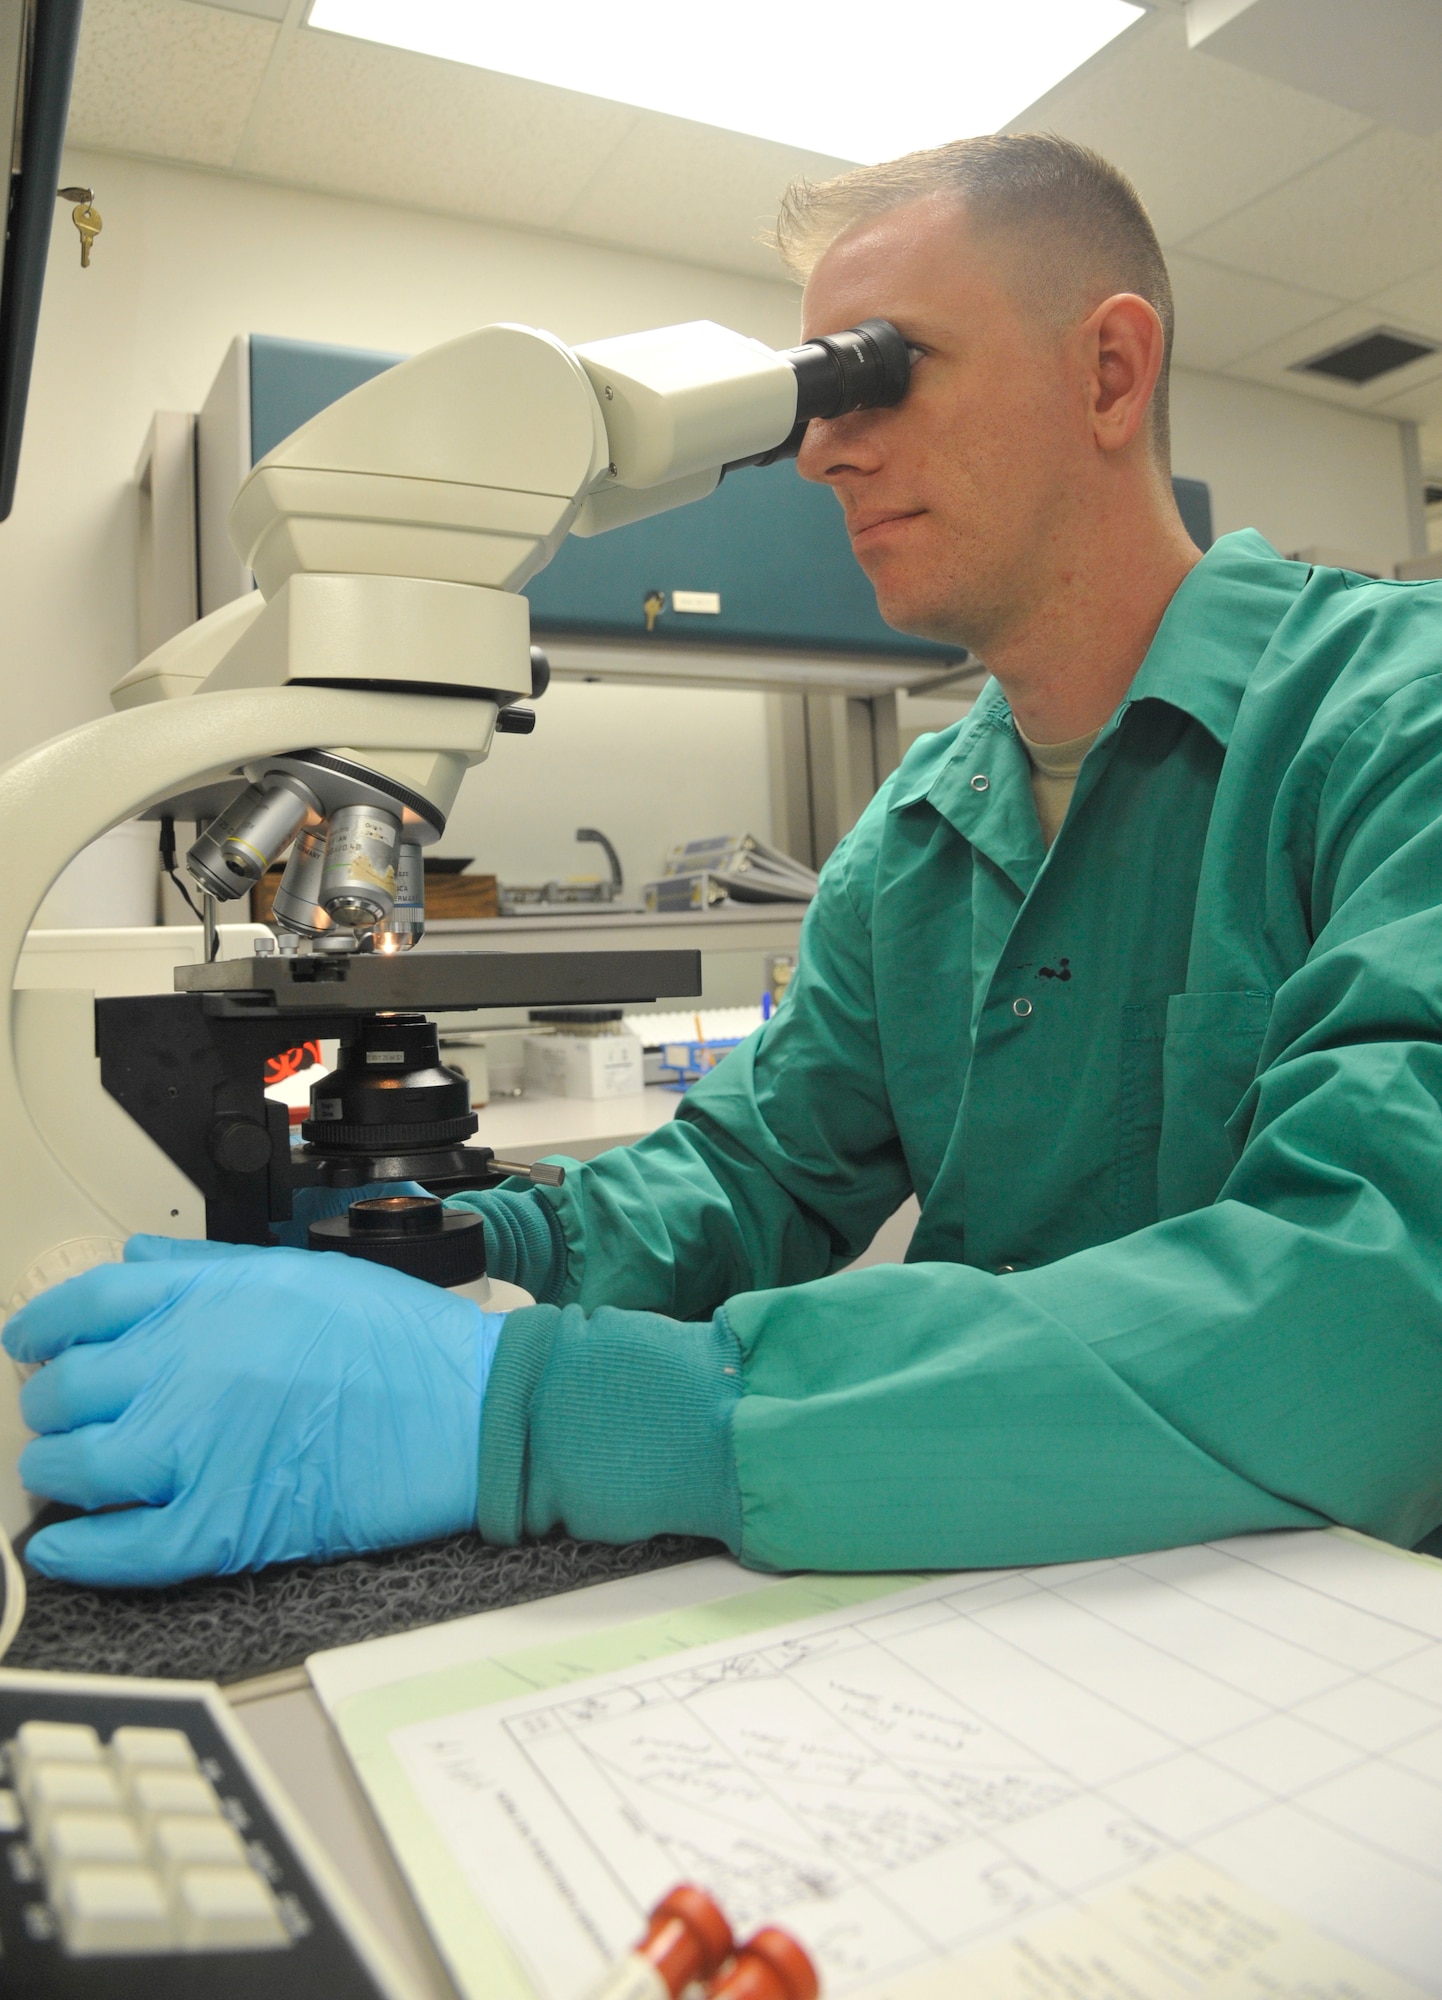 U.S. Air Force Staff Sgt. Jon Ringenoldus, 509th Medical Support Squadron medical laboratory technician, examines a KOH/ Wet prep sample at Whiteman Air Force Base, Mo., May 13, 2014. This sample is examined to determine if bacteria and yeast are present in the sample. (U.S. Air Force photo by Airman 1st Keenan Berry/Released)  